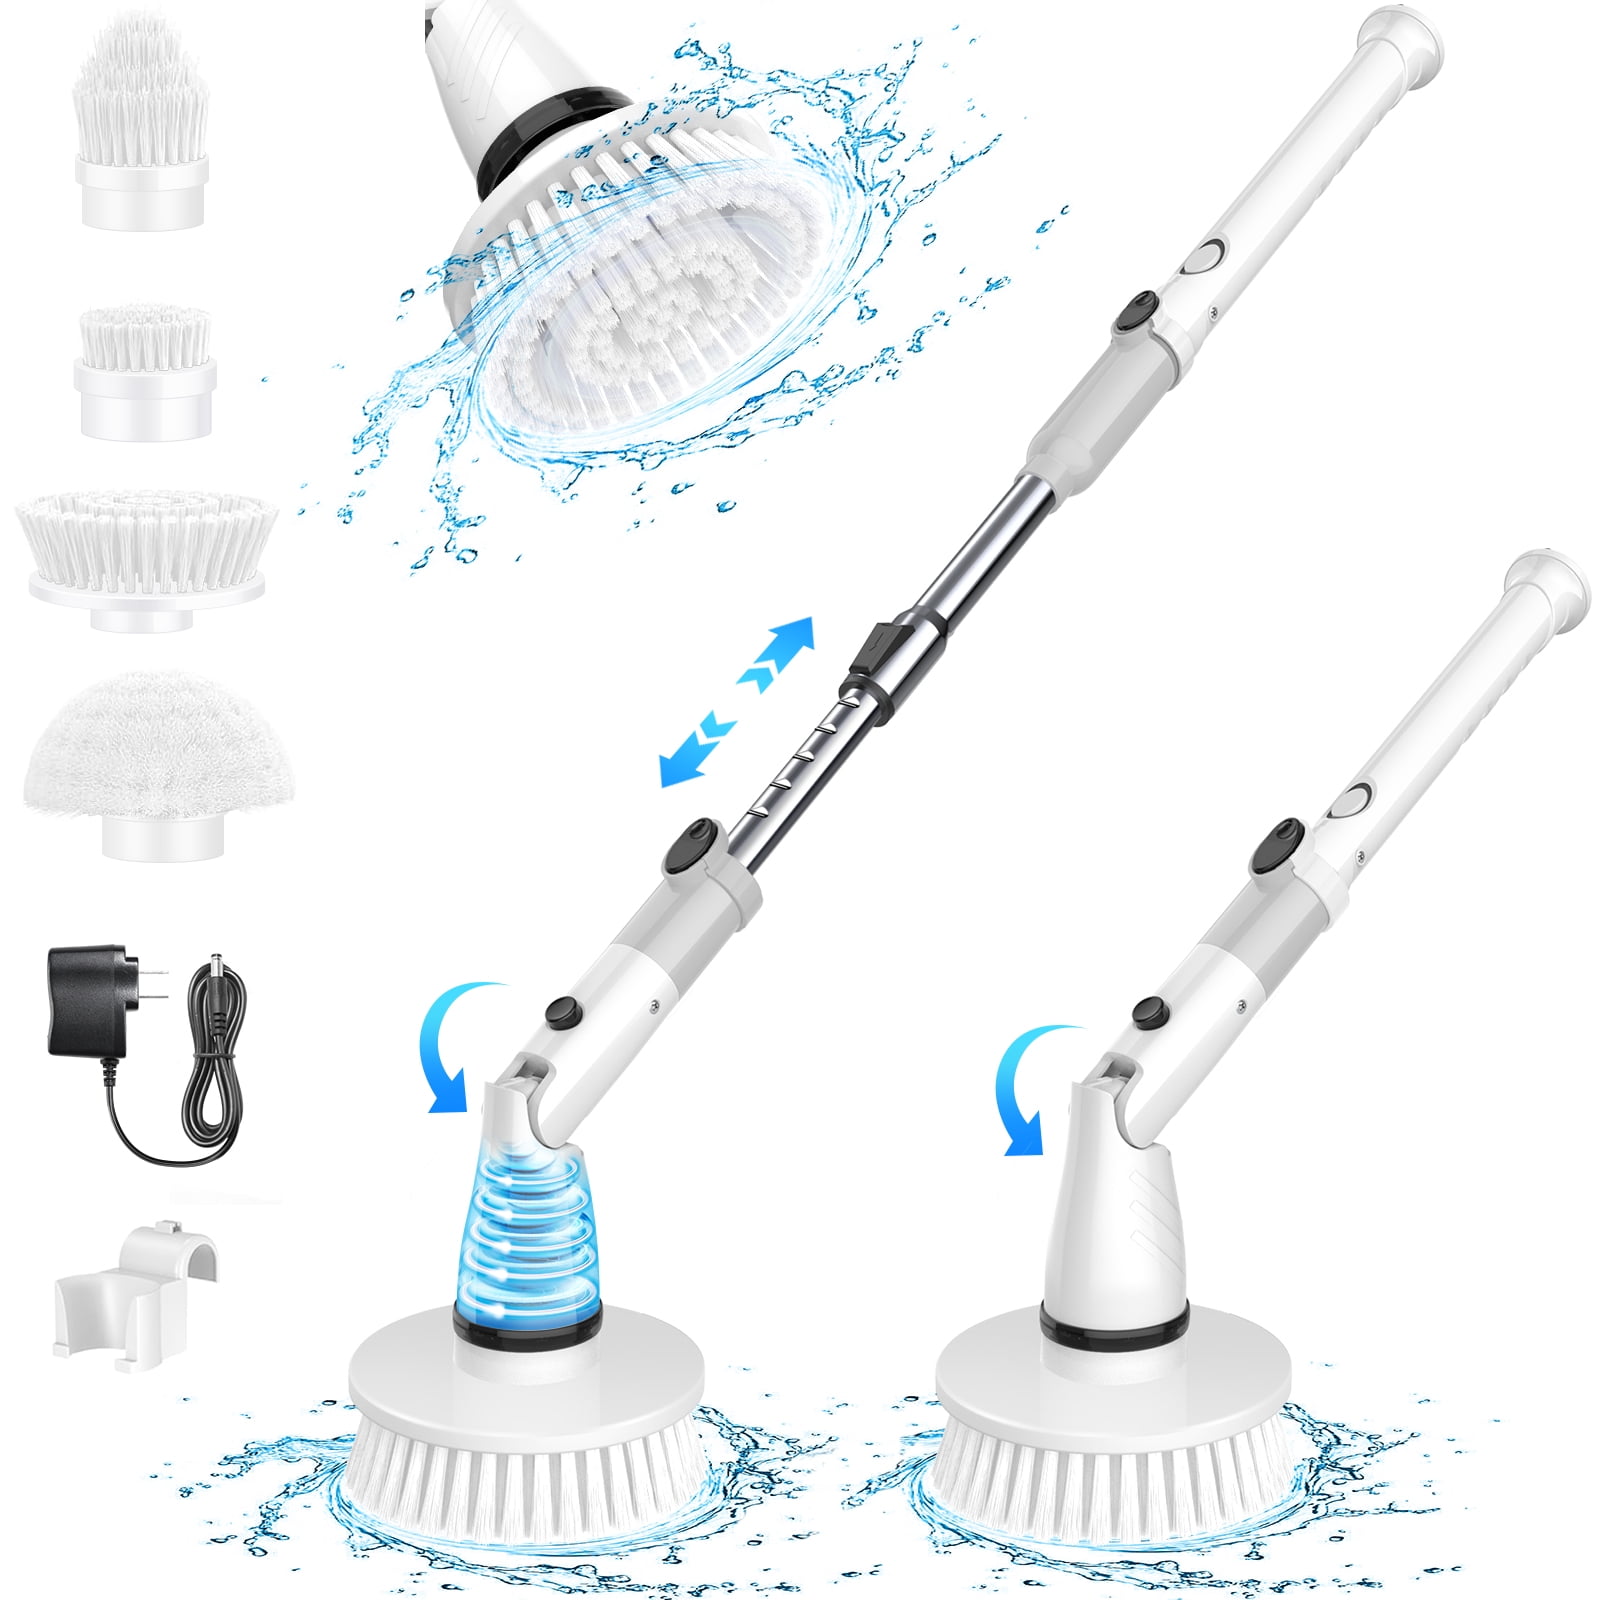 SZRSTH Electric Cordless Spin Scrubber Cleaning Brush with 4 Heads & Extension Handle